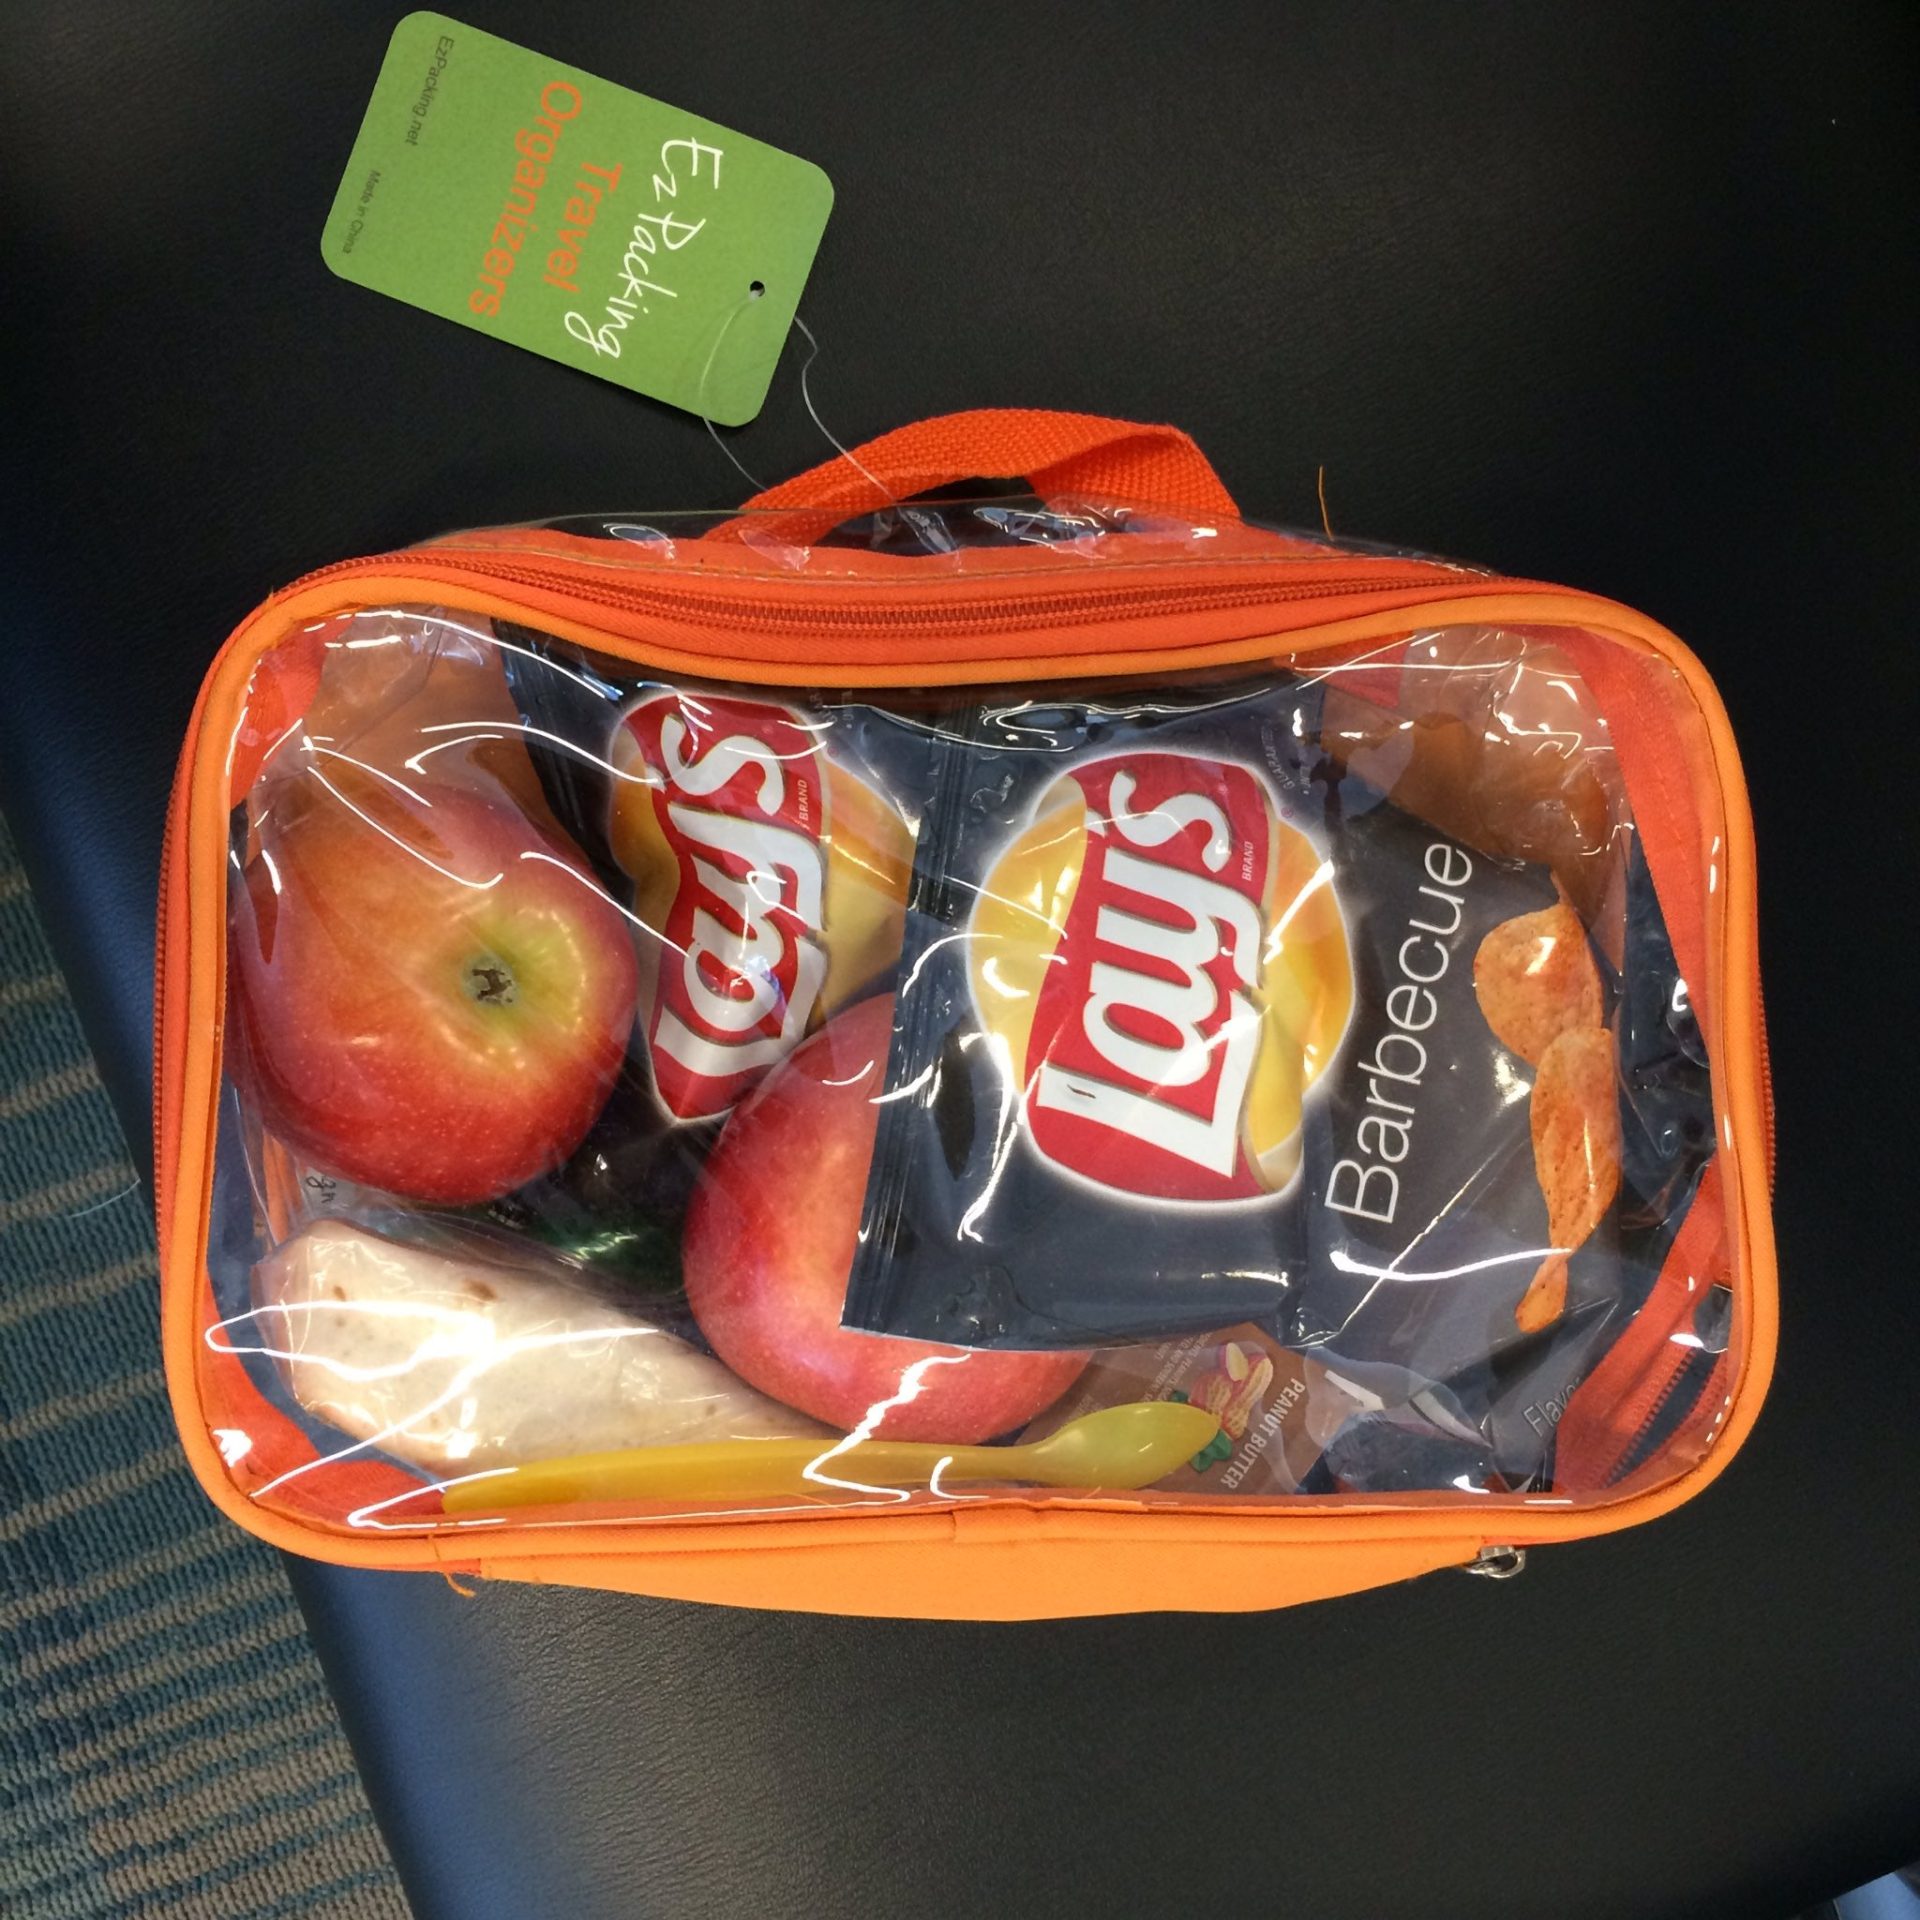 Fruits and chips in an orange small cube